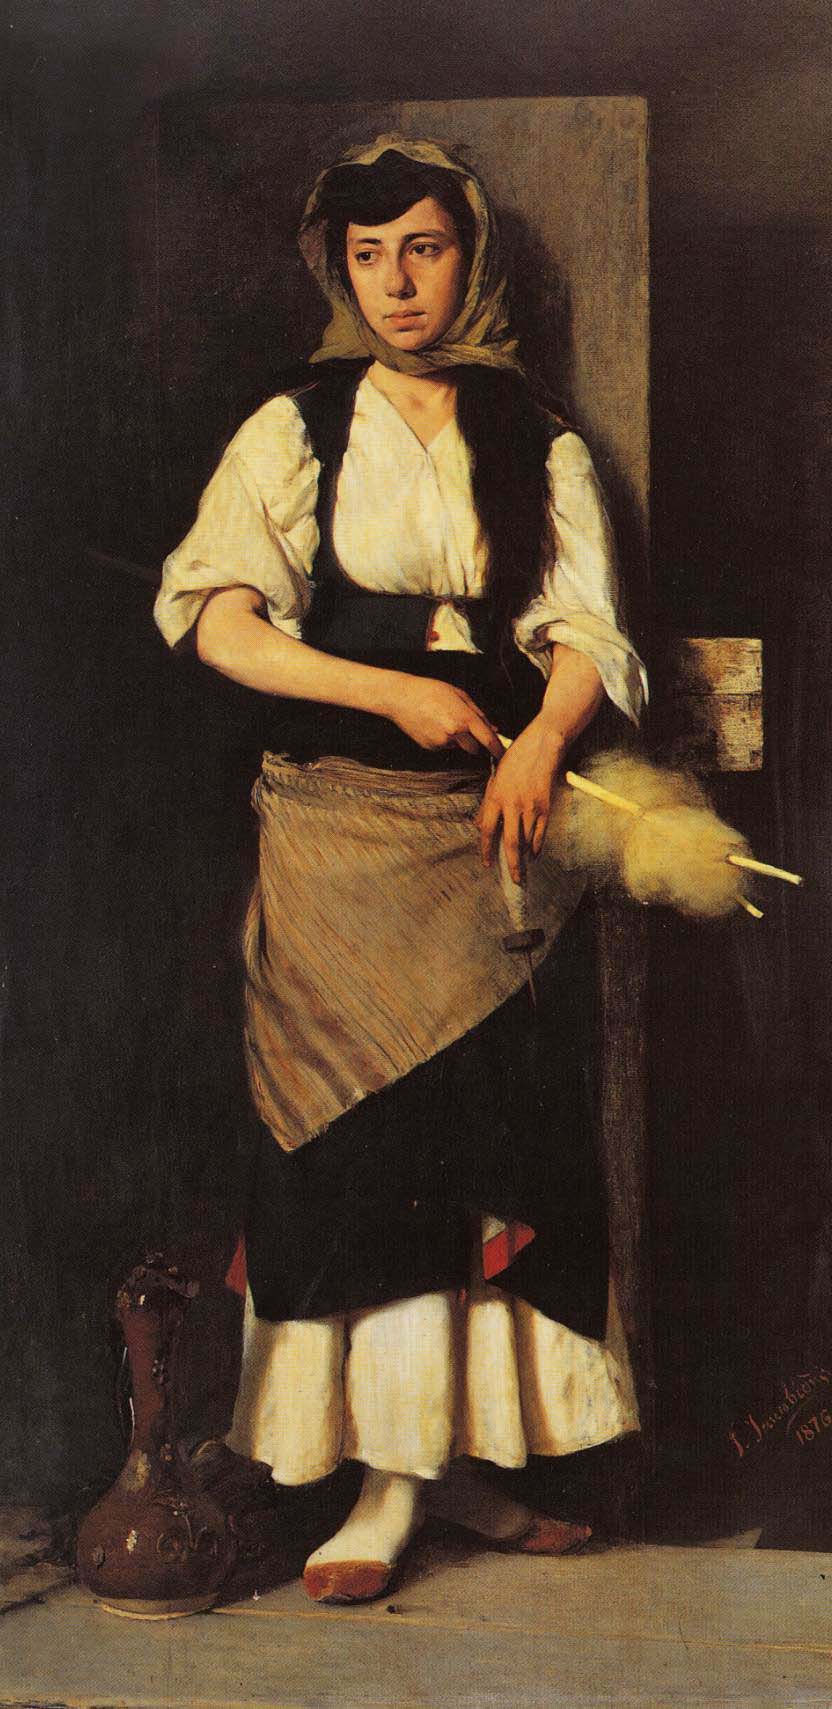 Title Greek: Το Κορίτσι The Girl, painted 1876, by the Greek Artist Georgios Jakobides (1853–1932), image found on Wiki Commons and marked as being in the Public Domain